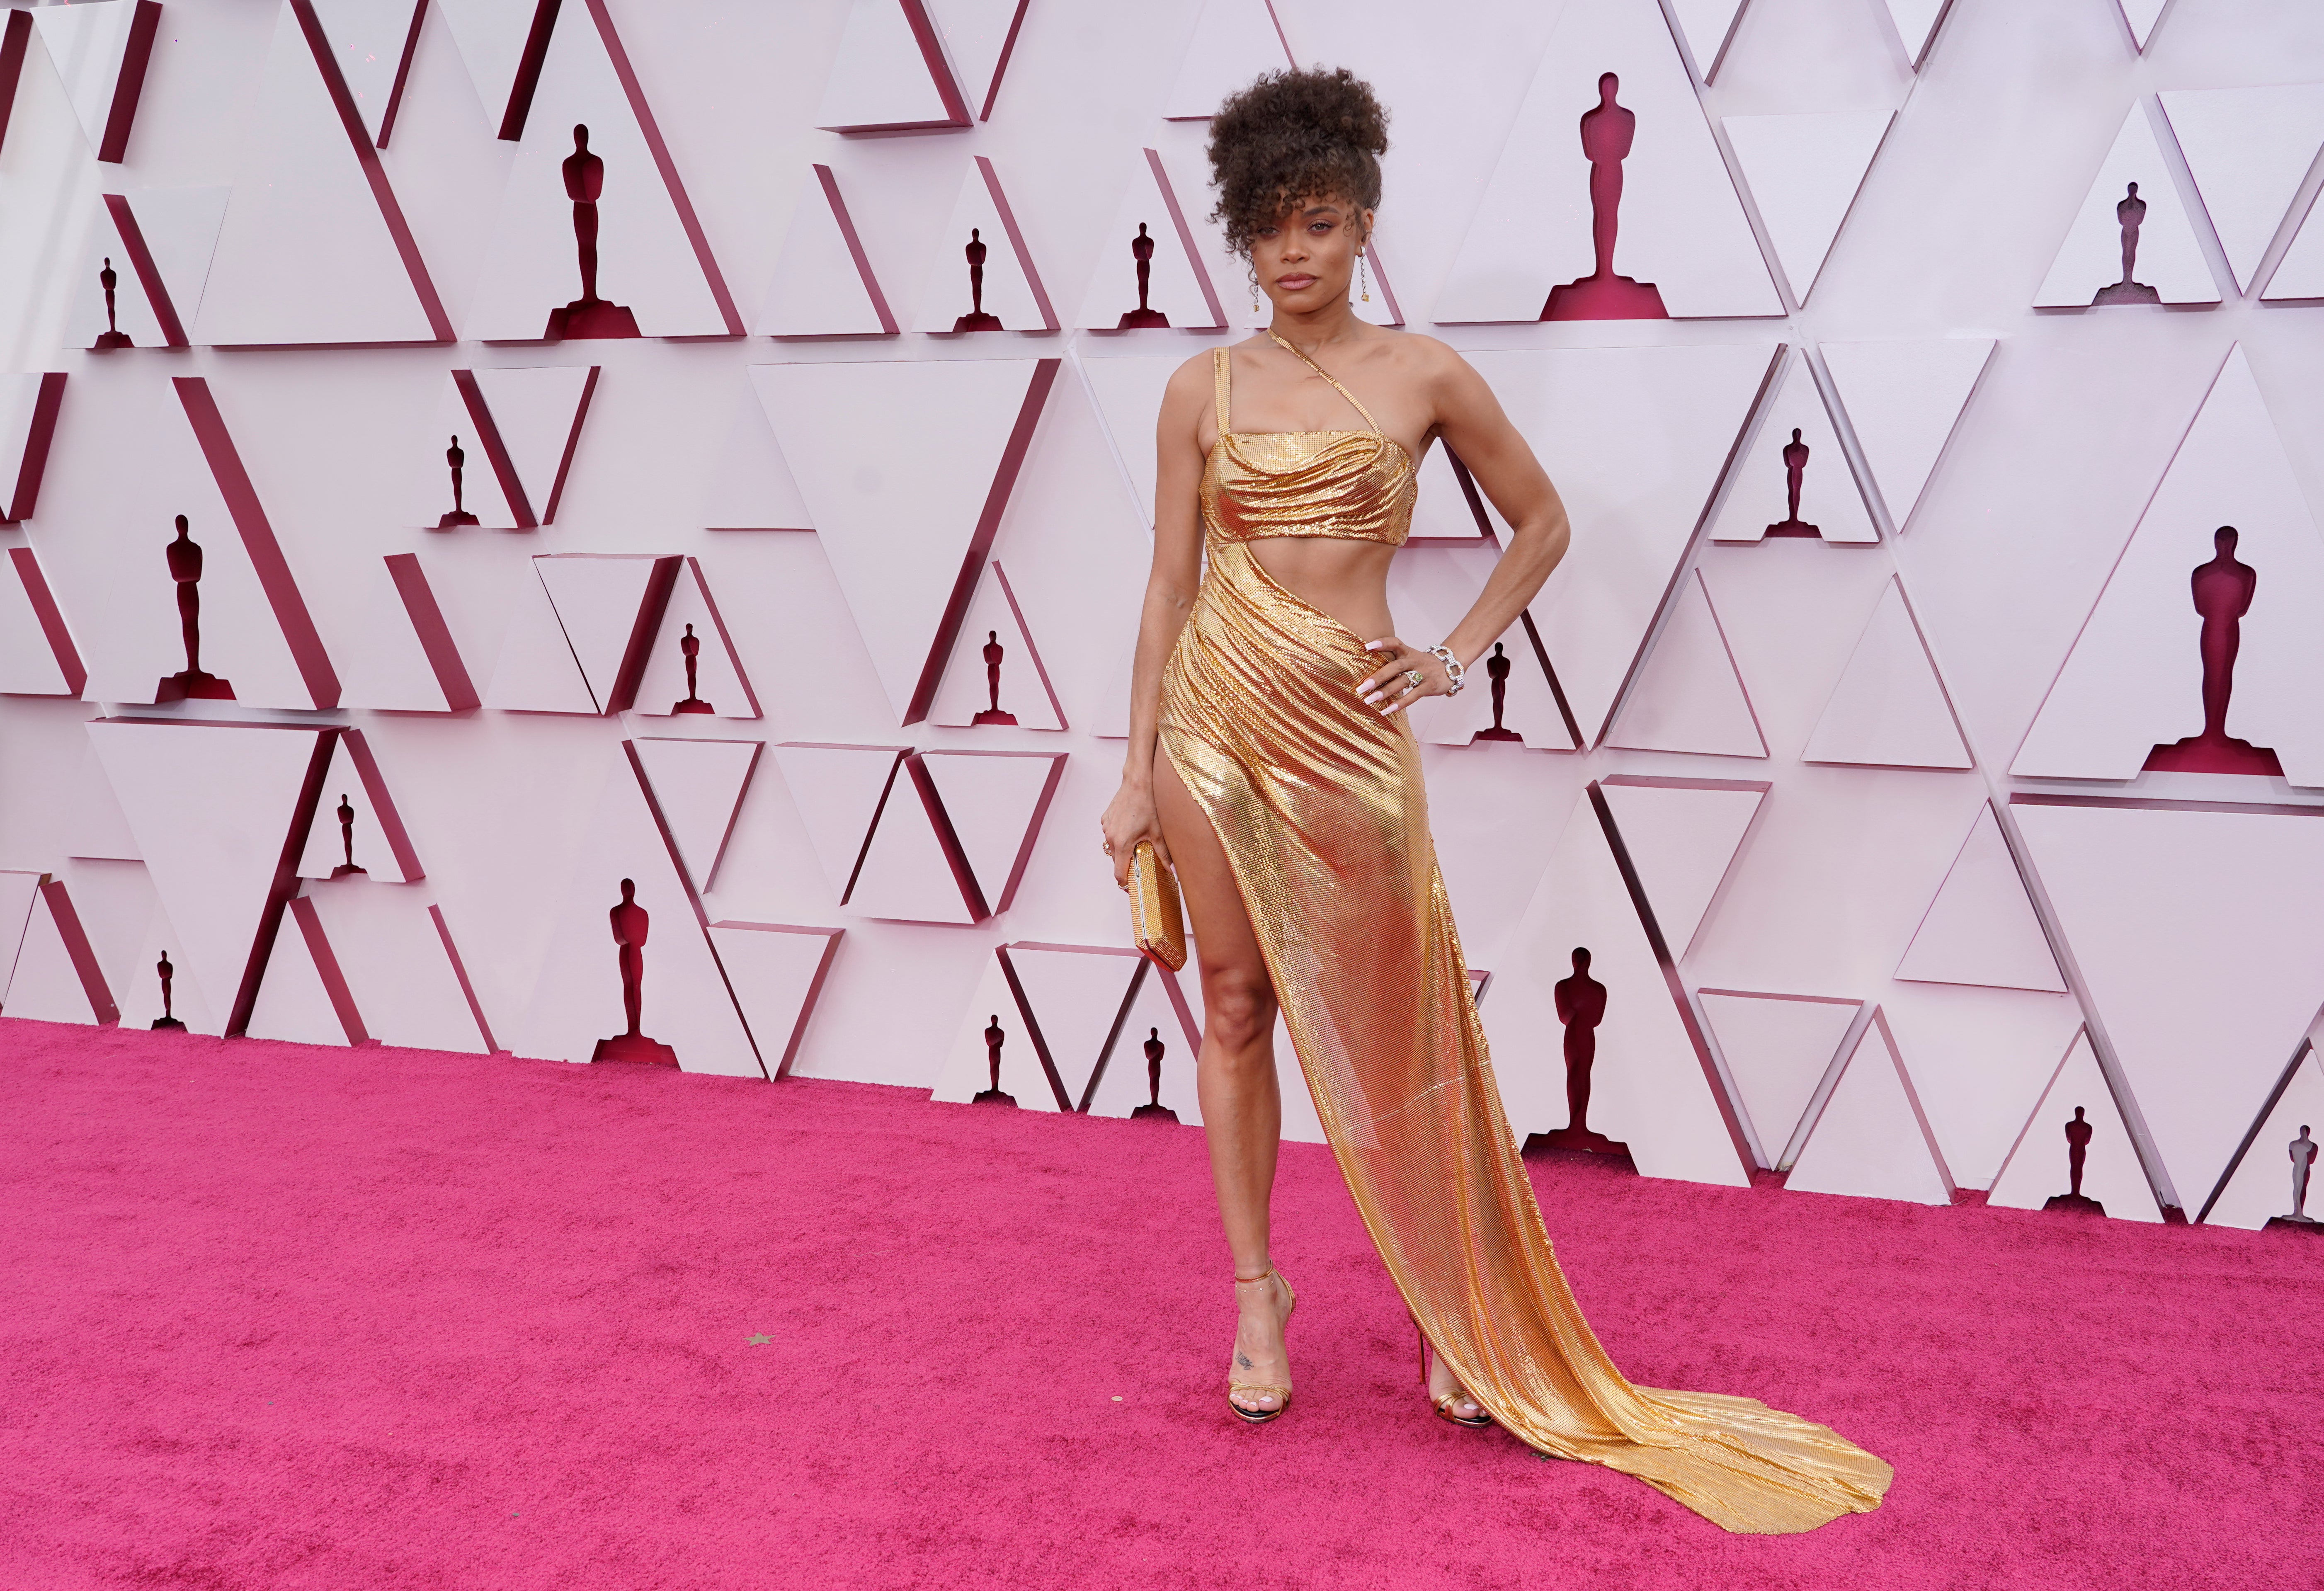 Andra Day at the 93rd Academy Awards